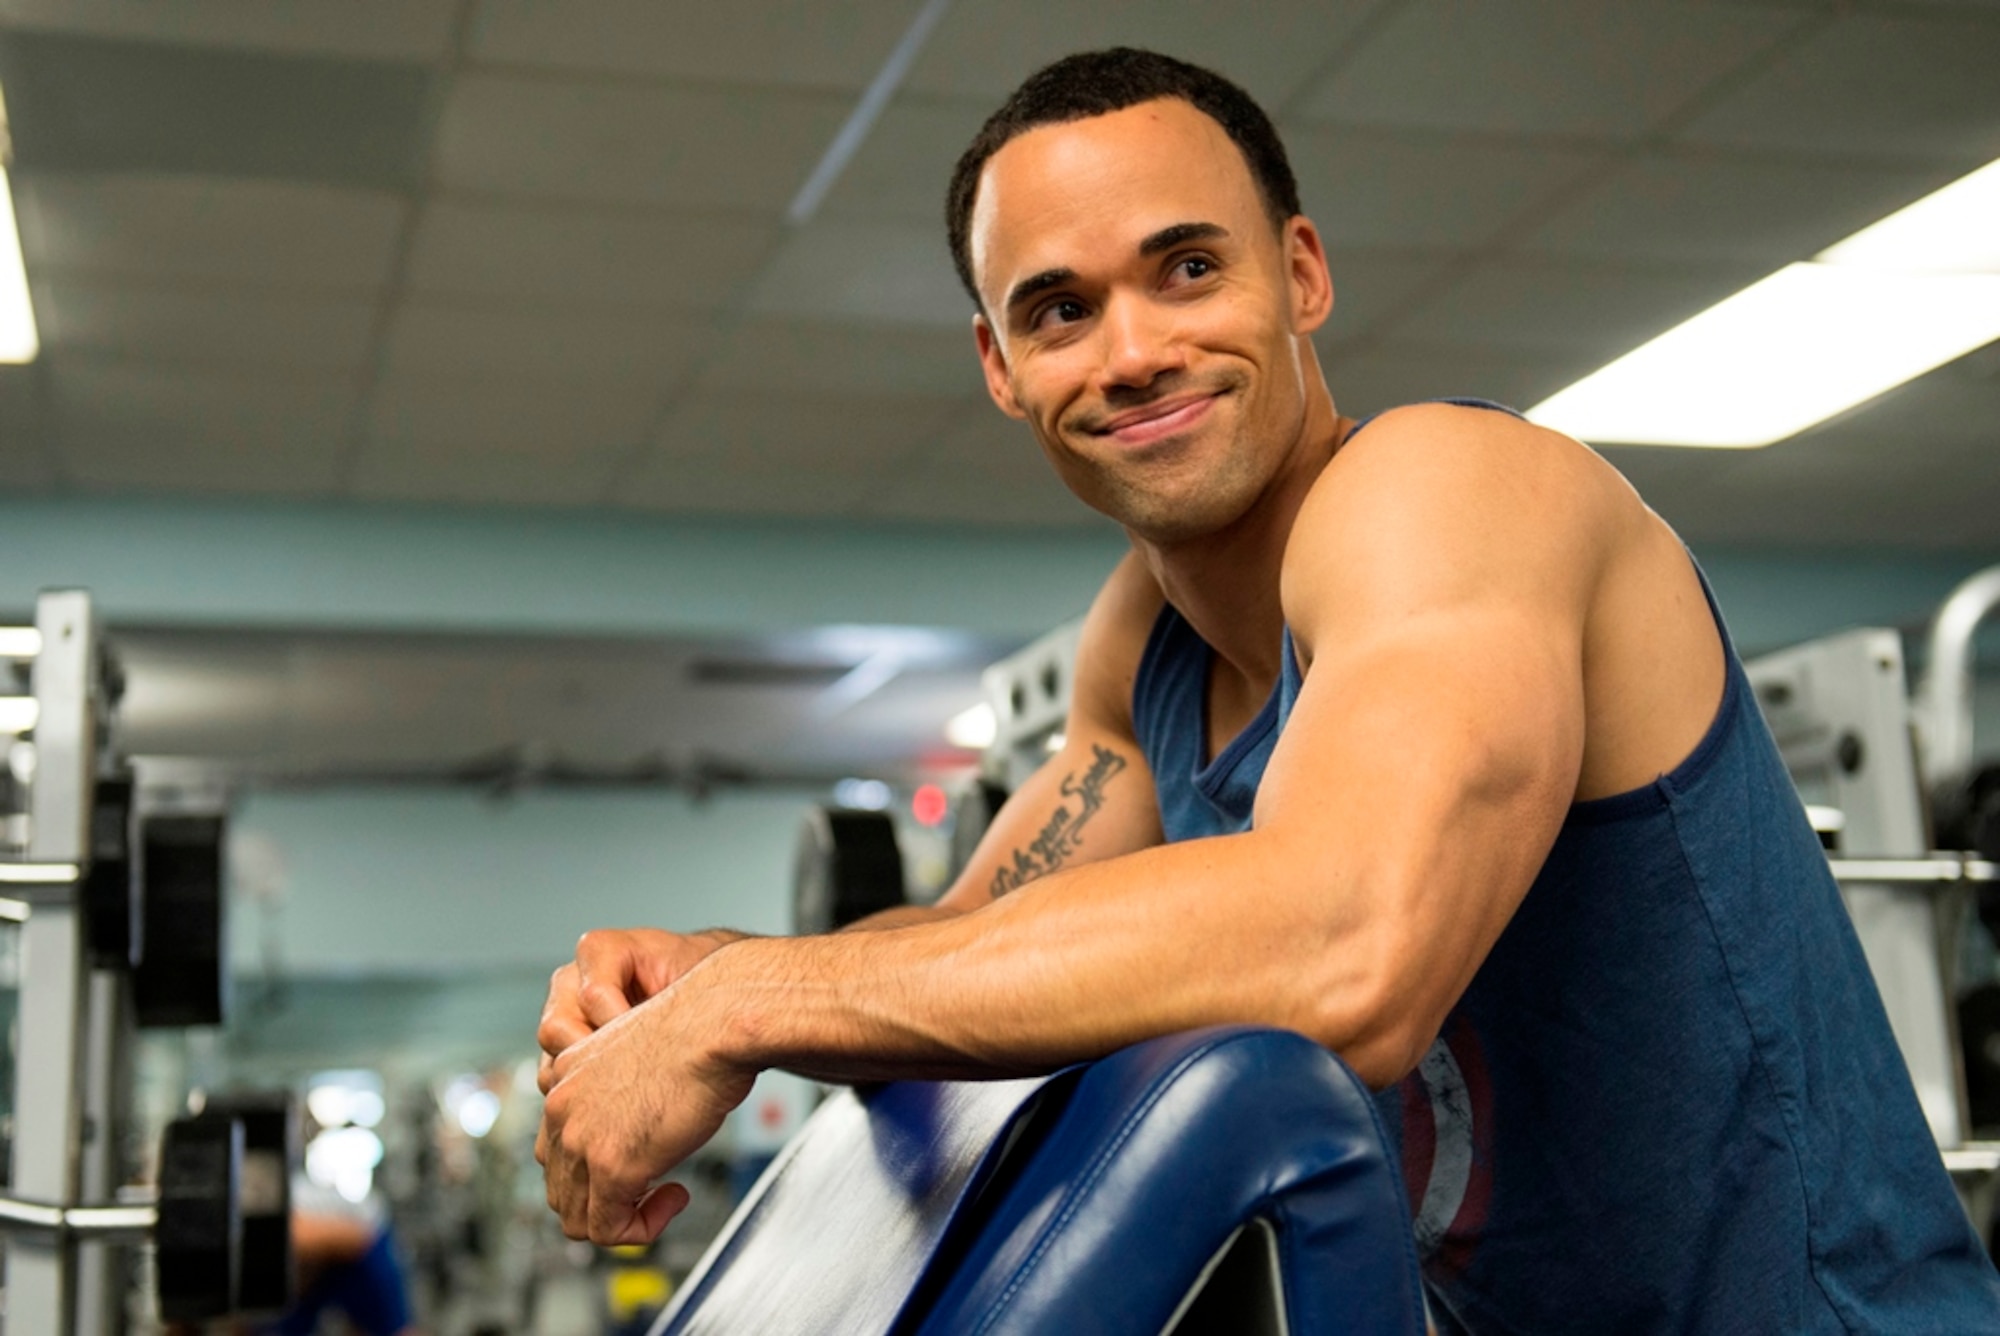 First Lt. Roman Tillman, a 5th Space Launch Squadron responsible engineer, takes a break before performing more repetitions in his workout routine July 21, 2015, at the fitness center on Patrick Air Force Base, Fla. Tillman is a men’s physique competitor working toward his International Federation of Bodybuilding and Fitness pro card. (U.S. Air Force photo/Matthew Jurgens)